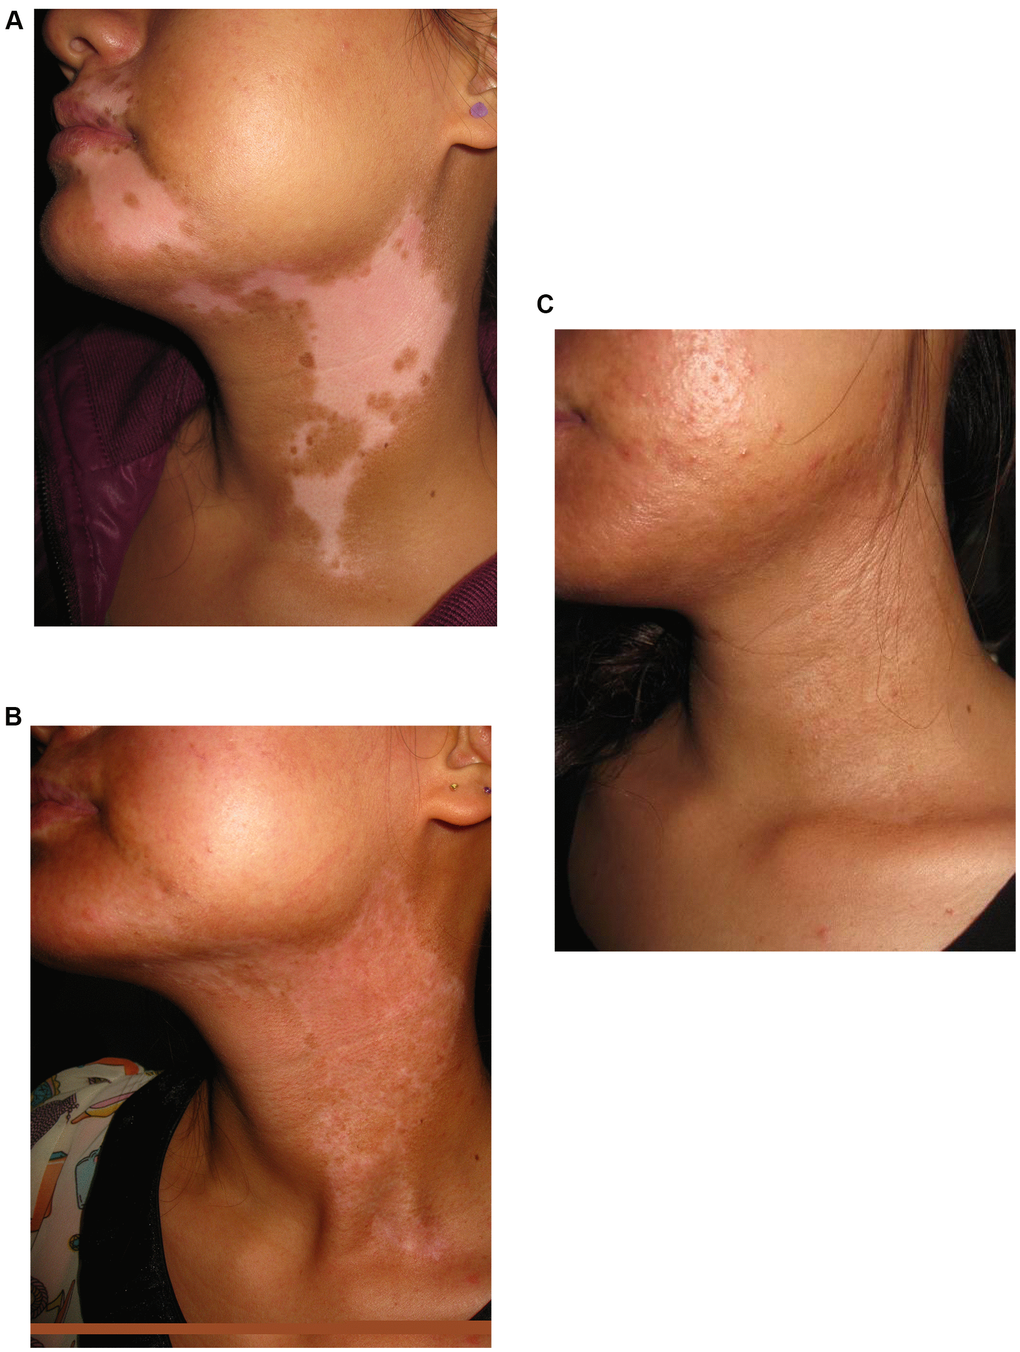 A 20-year old woman with segmental vitiligo on the face and neck. (A) Before surgery. A 20-year old woman with segmental vitiligo on the face and neck. (B) Six months after autologous non-cultured melanocyte-keratinocyte transplantation procedure (MKTP). A 20-year old woman with segmental vitiligo on the face and neck. (C) Twelve months after MKTP with a repigmentation of 100%.